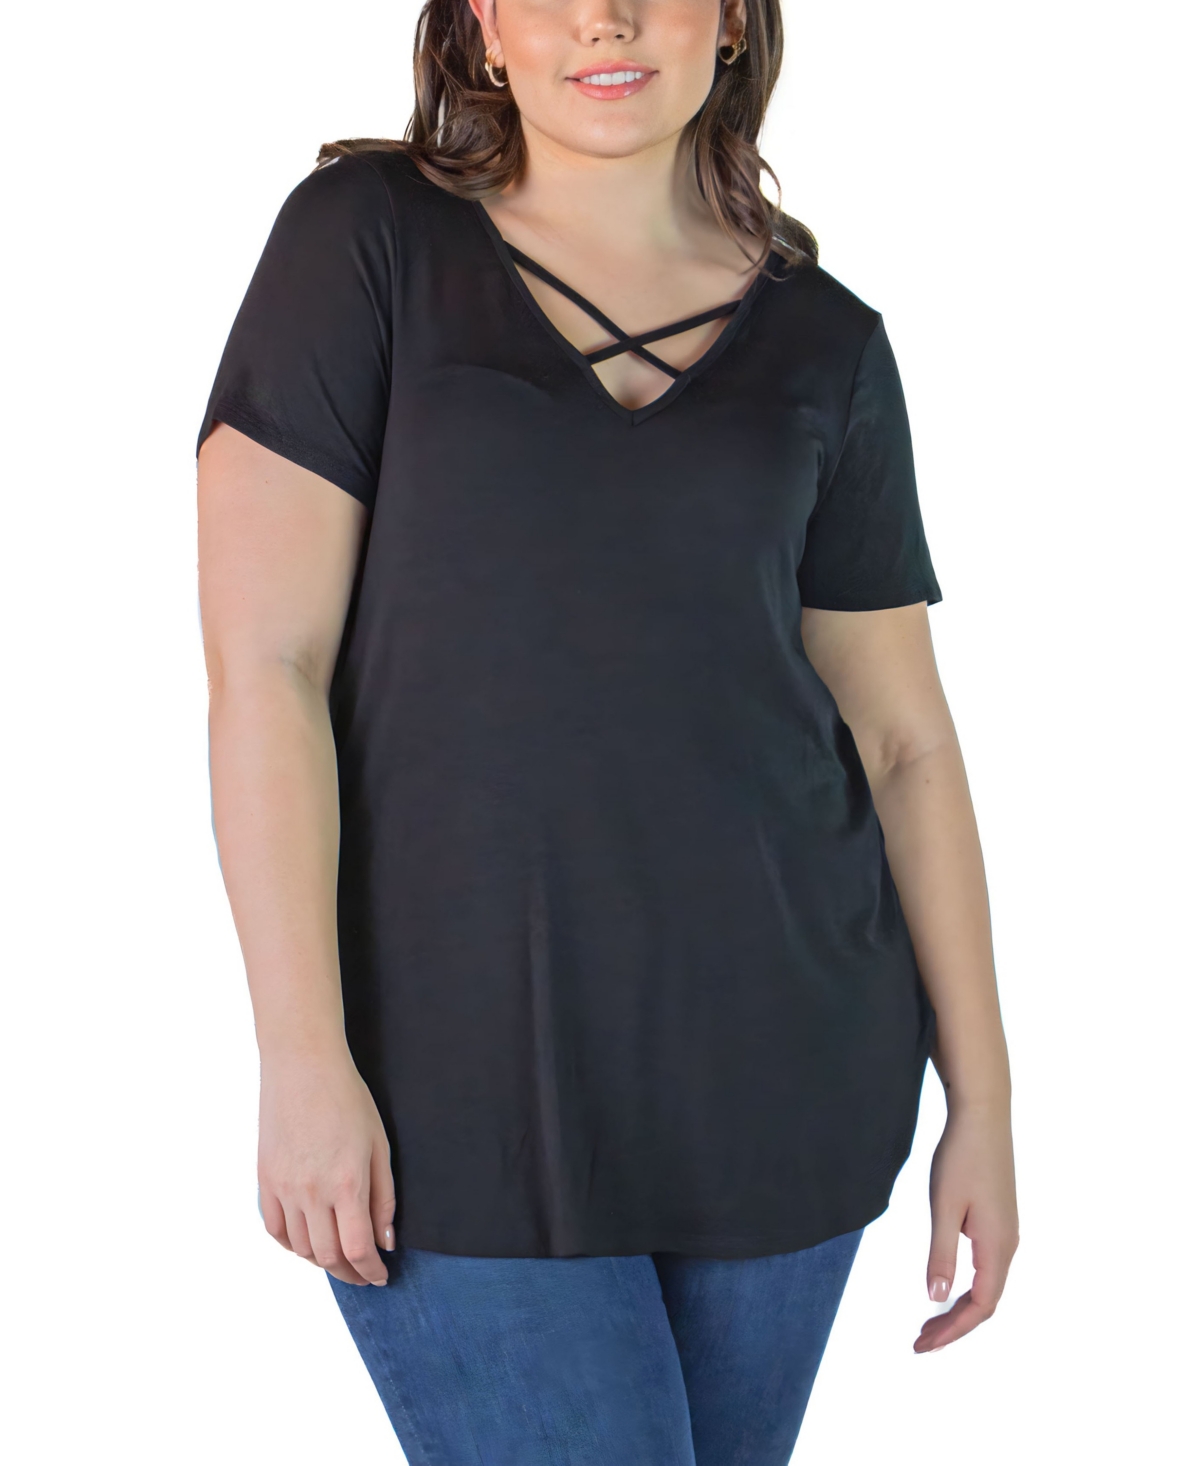 24seven Comfort Apparel Plus Size V-neck T-shirt Tunic Top In Black